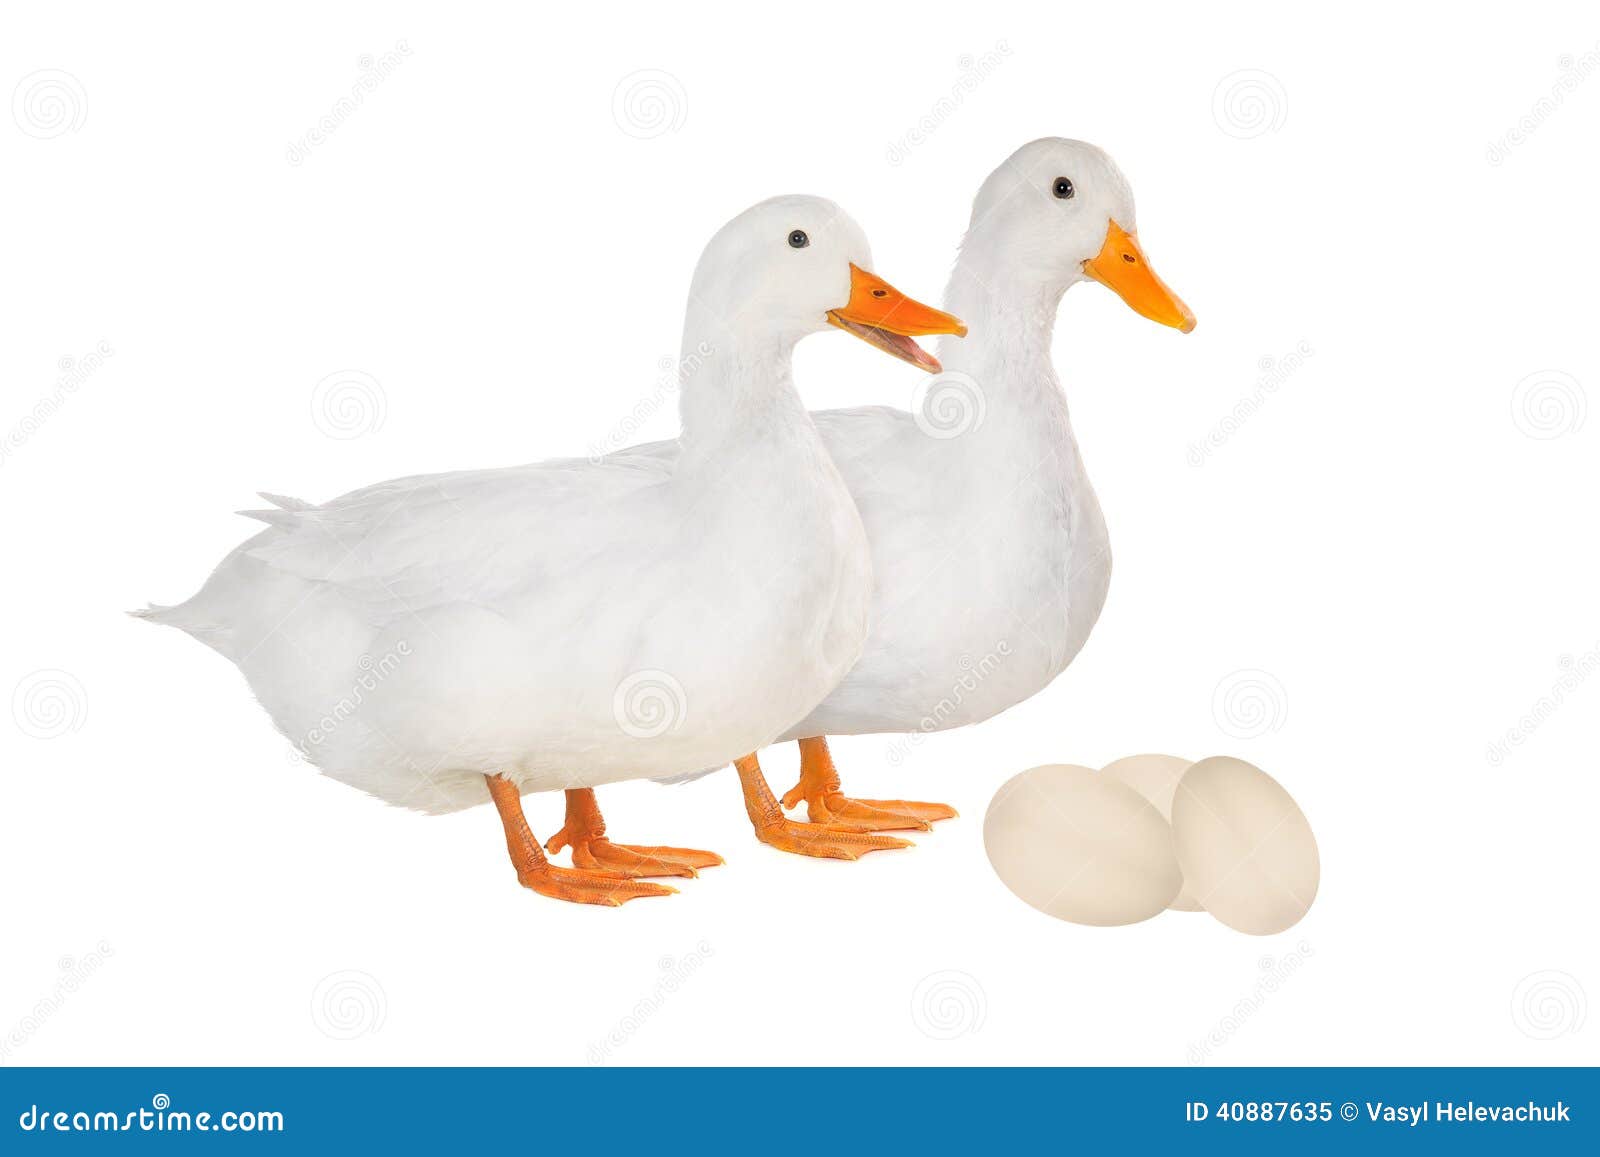 Duck stock image. Image of poultry, agriculture, smart - 40887635